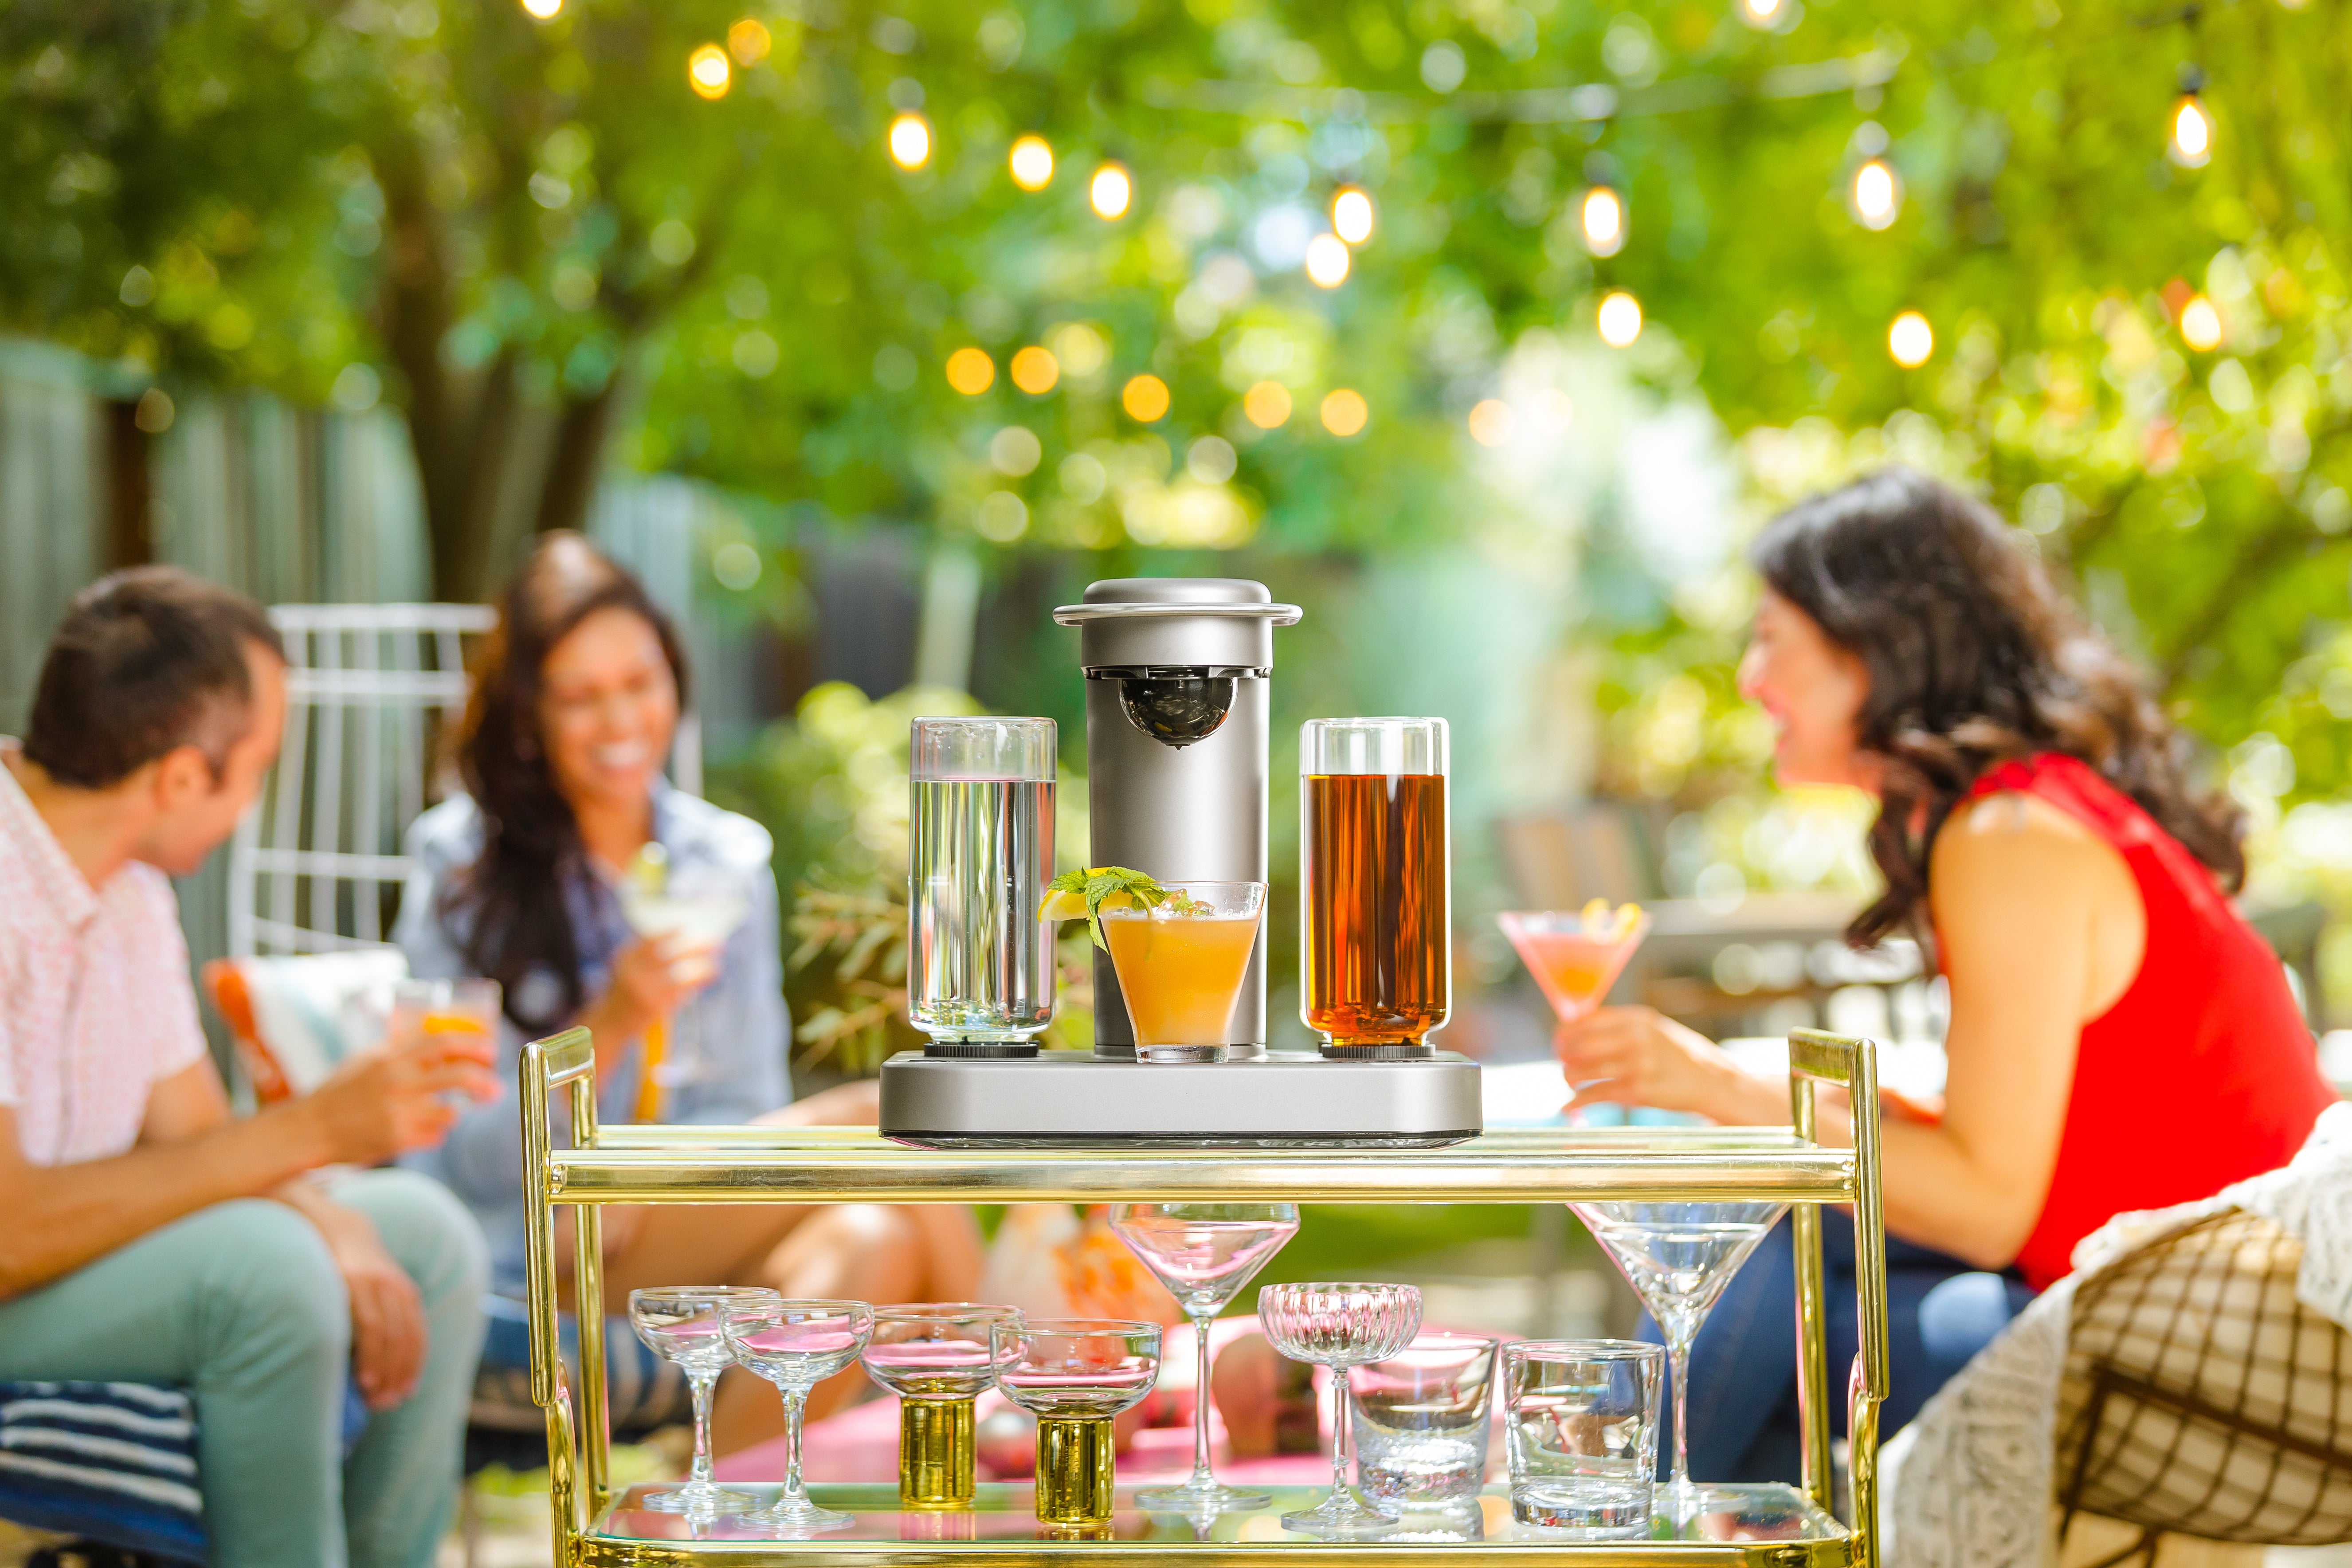 The Bartesian sitting on top of a glass table with gold accents as three models enjoy their beverages in the background.